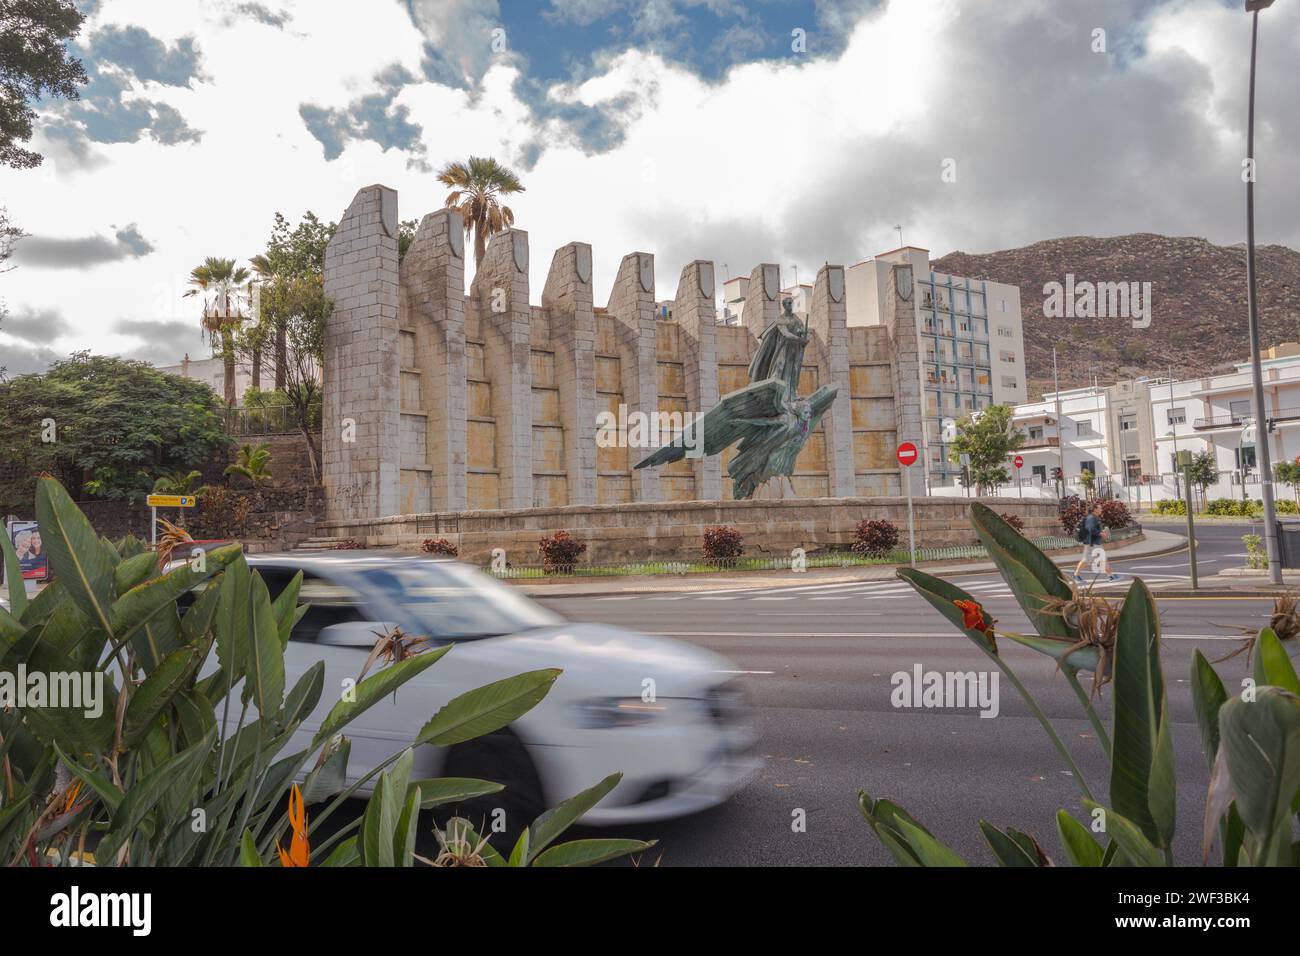 Monument to Victory (or Angel of Victory), commonly known as Monument to Franco, Santa Cruz,Tenerife, Canary Islands, Spain ,Europe Stock Photo